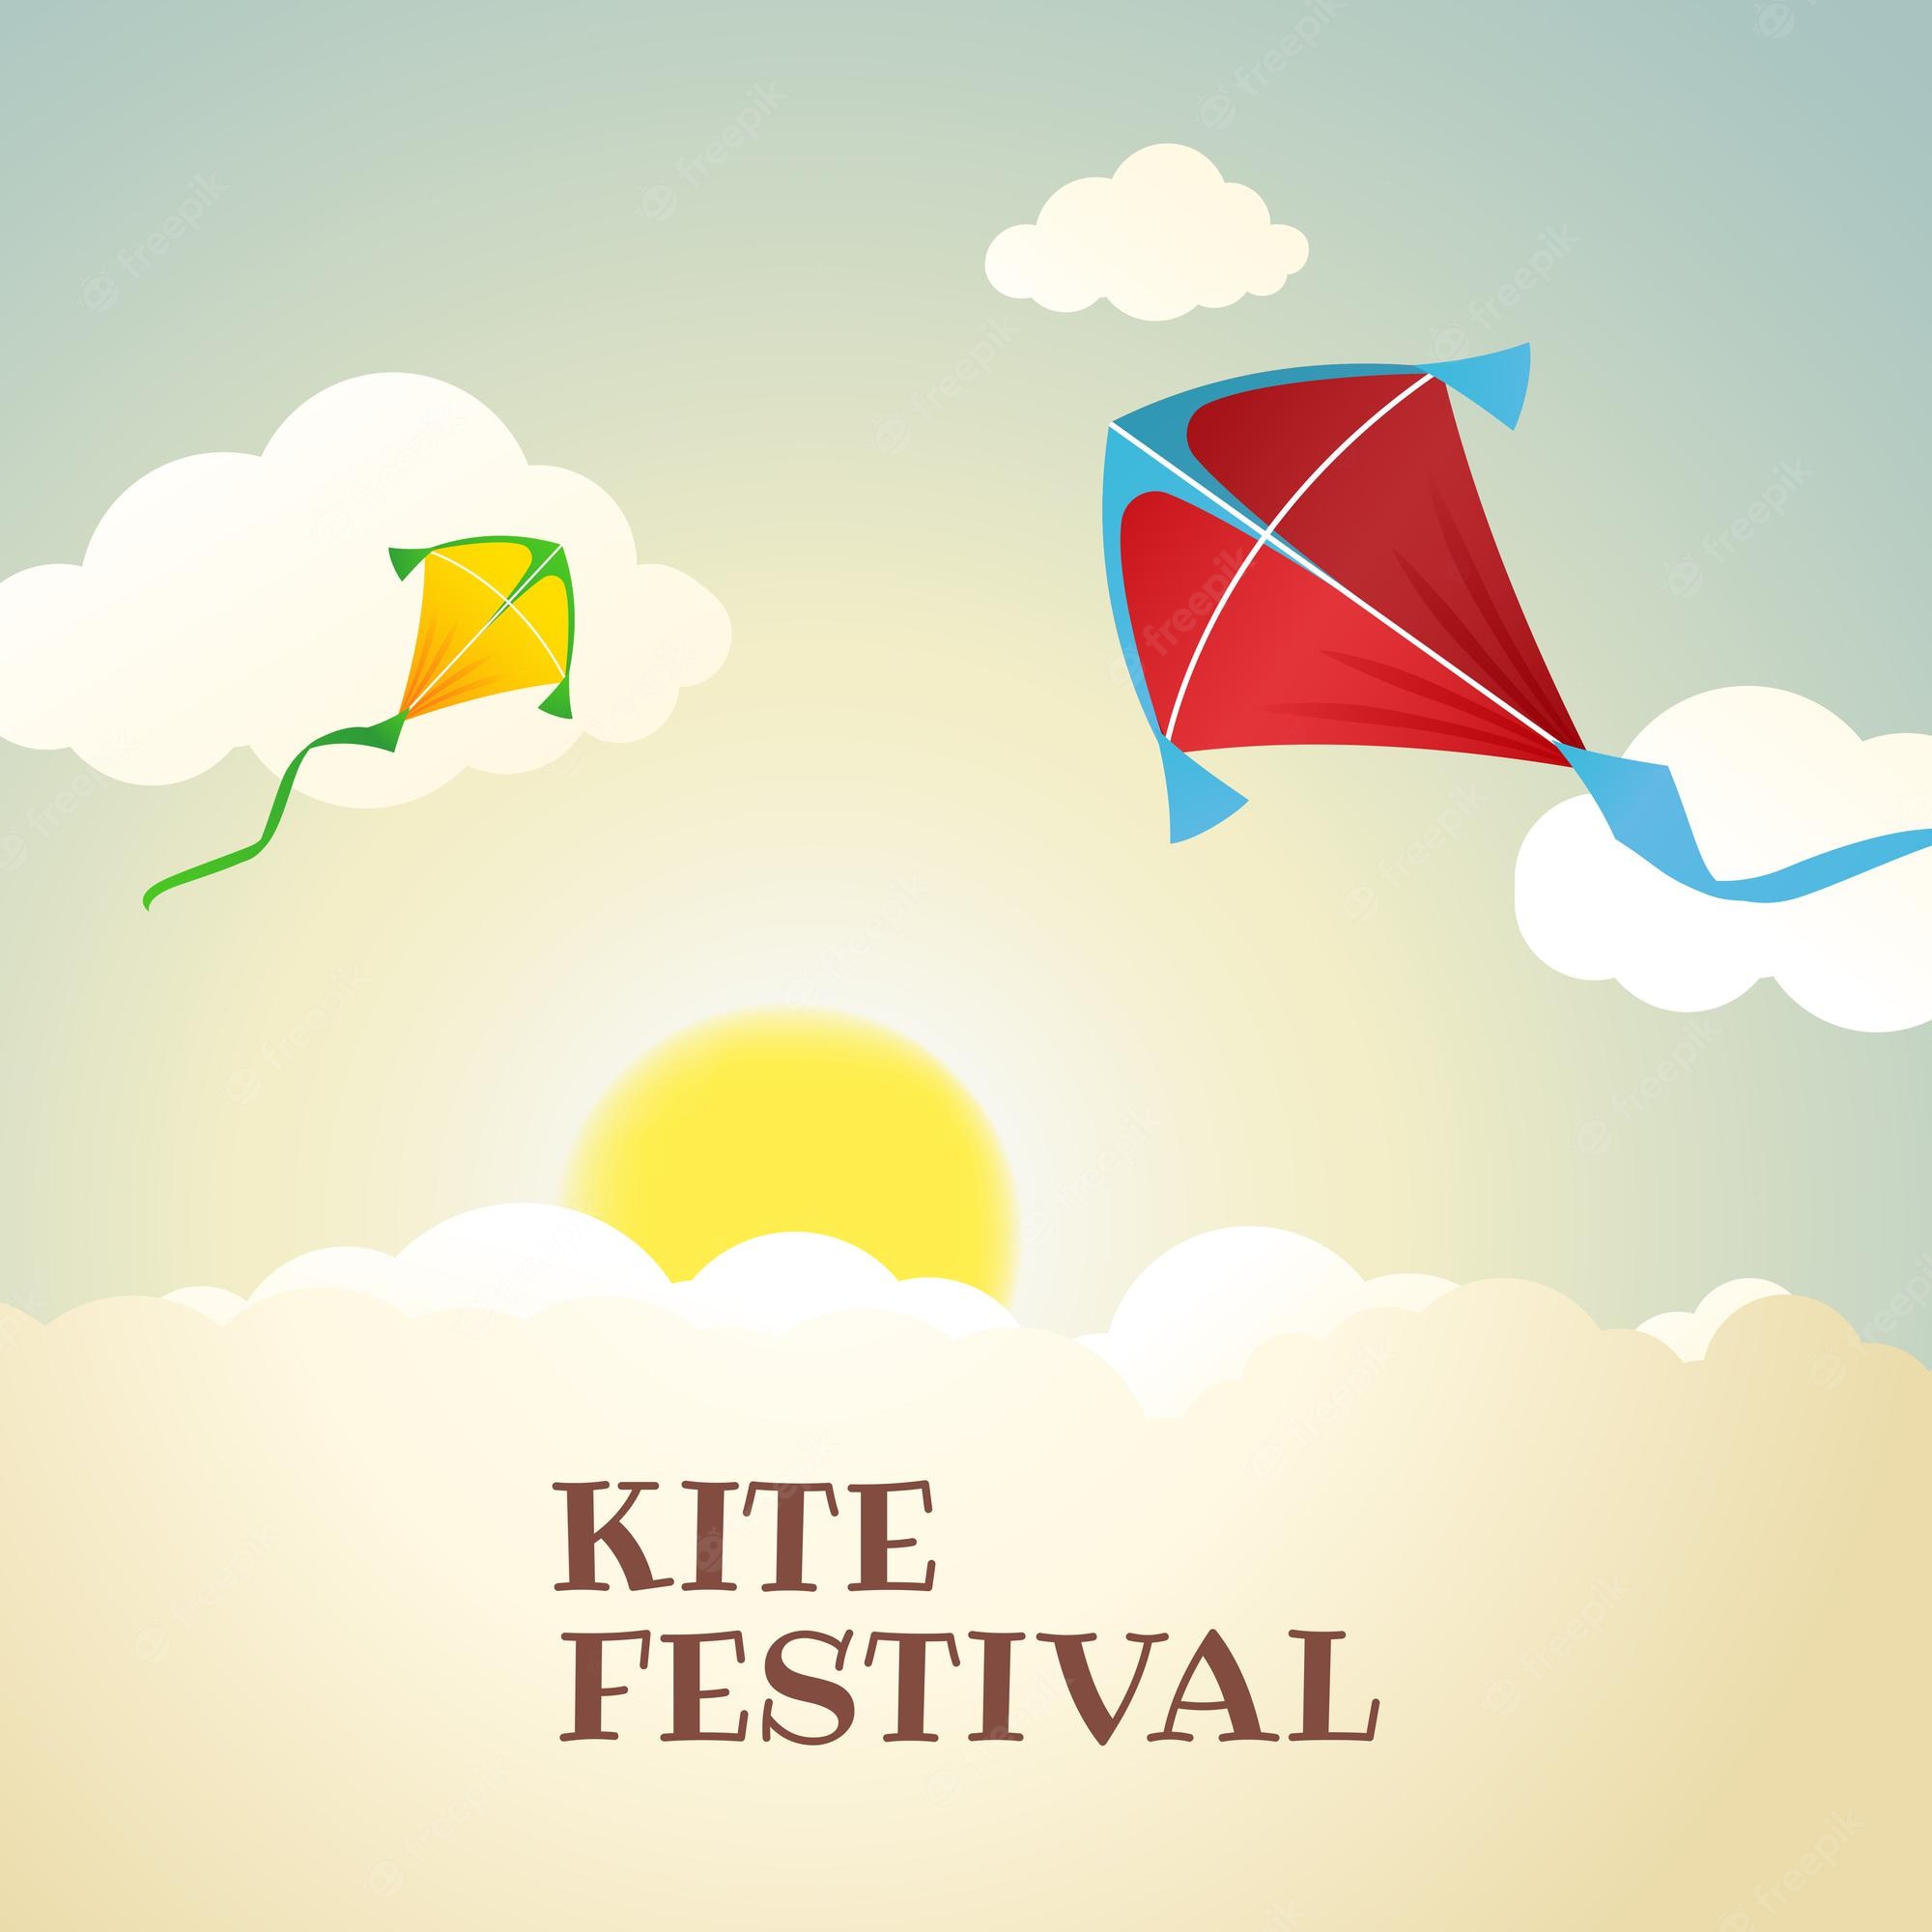 Page kite festival poster images